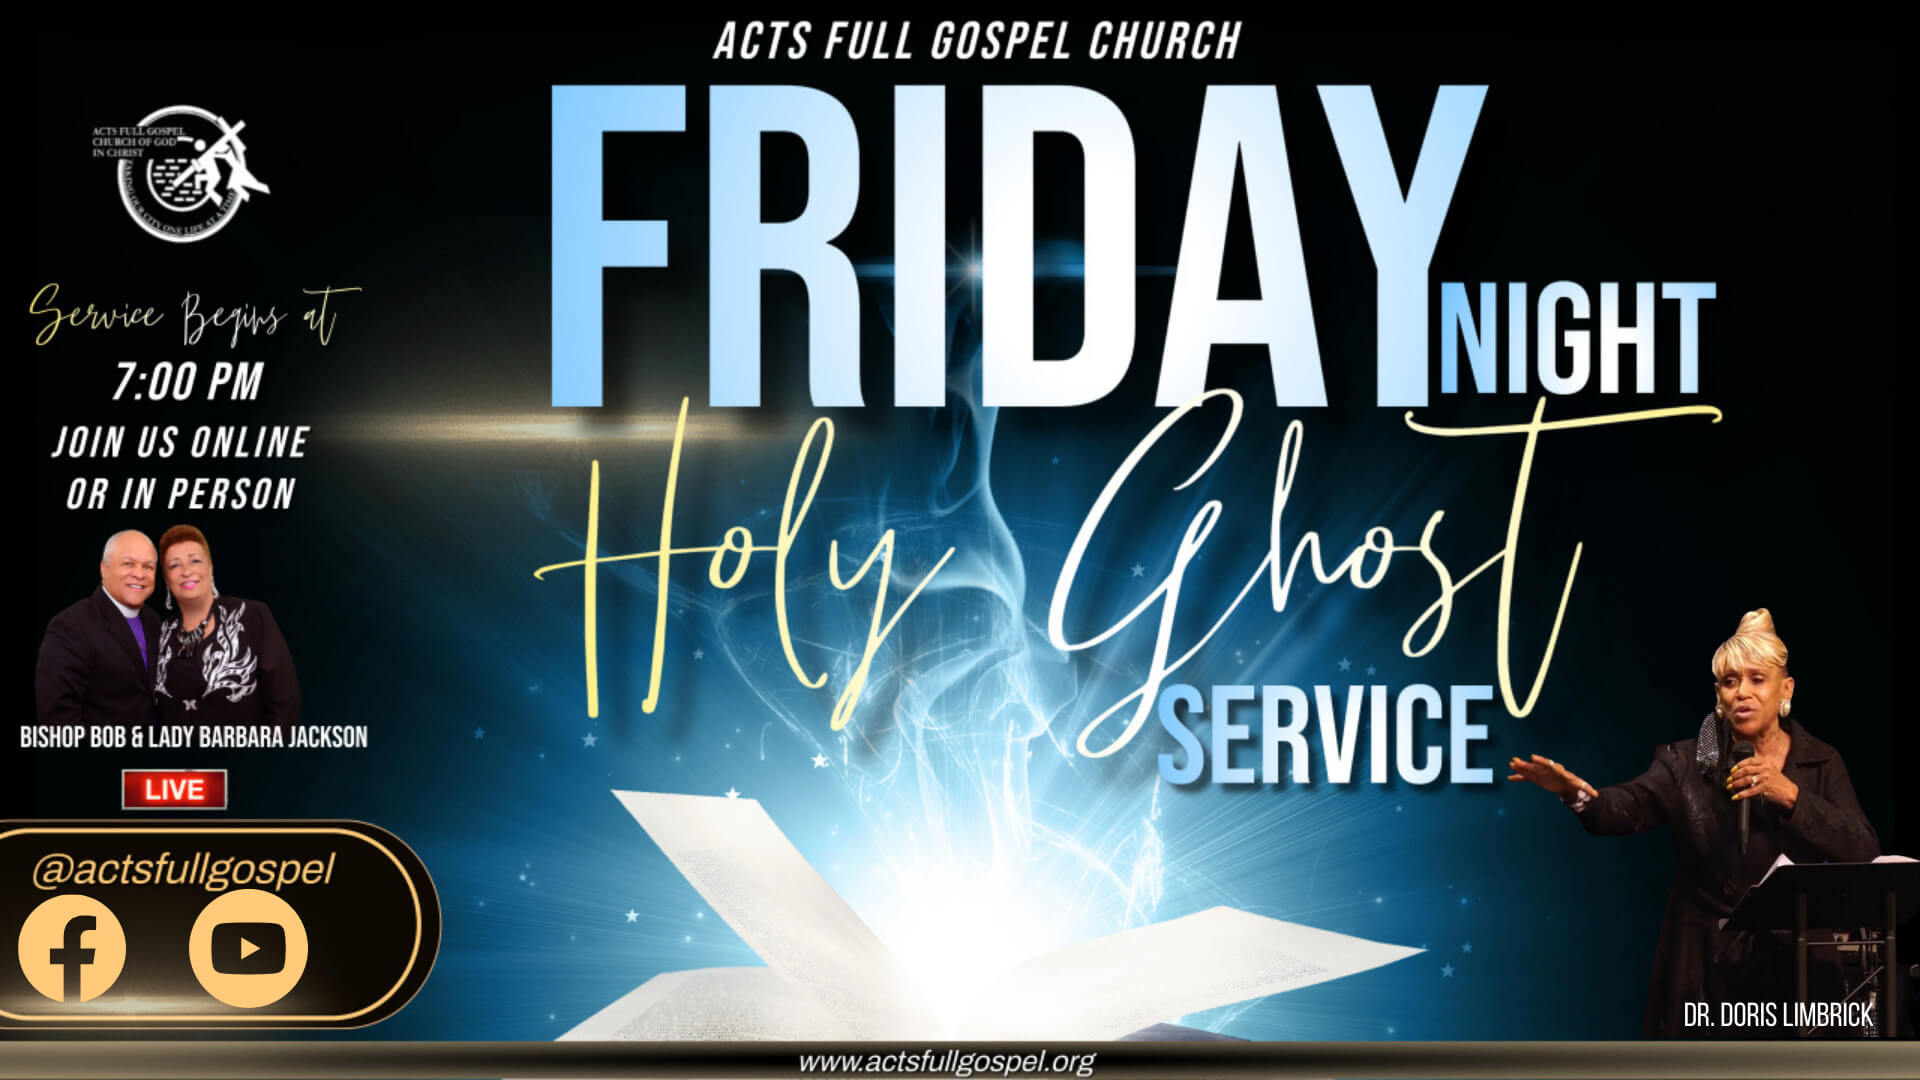 Friday Night Holy Ghost Service (5) (2)